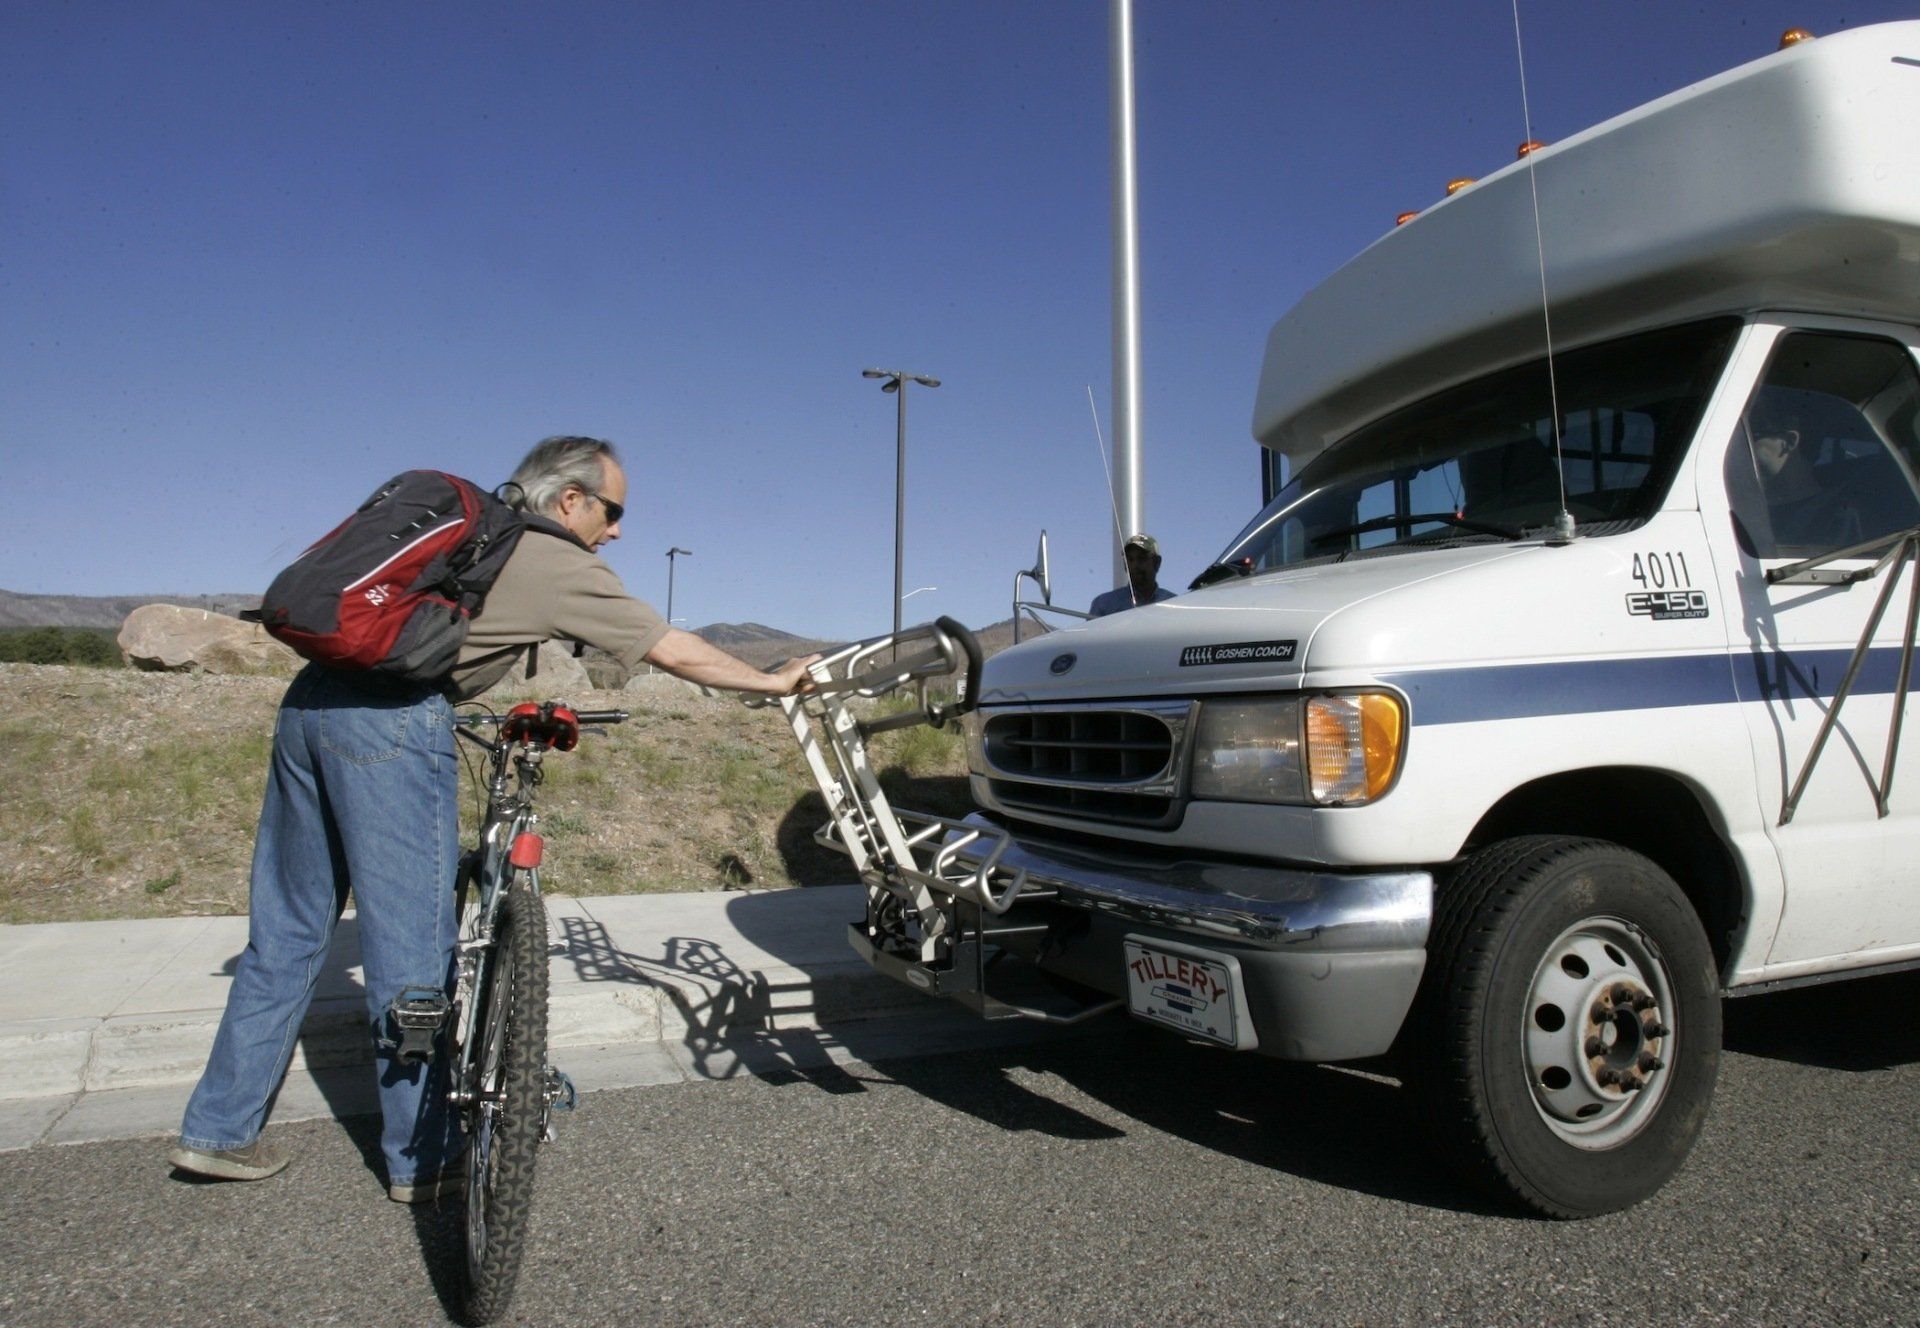 Passenger loading his bicycle on the front of bus